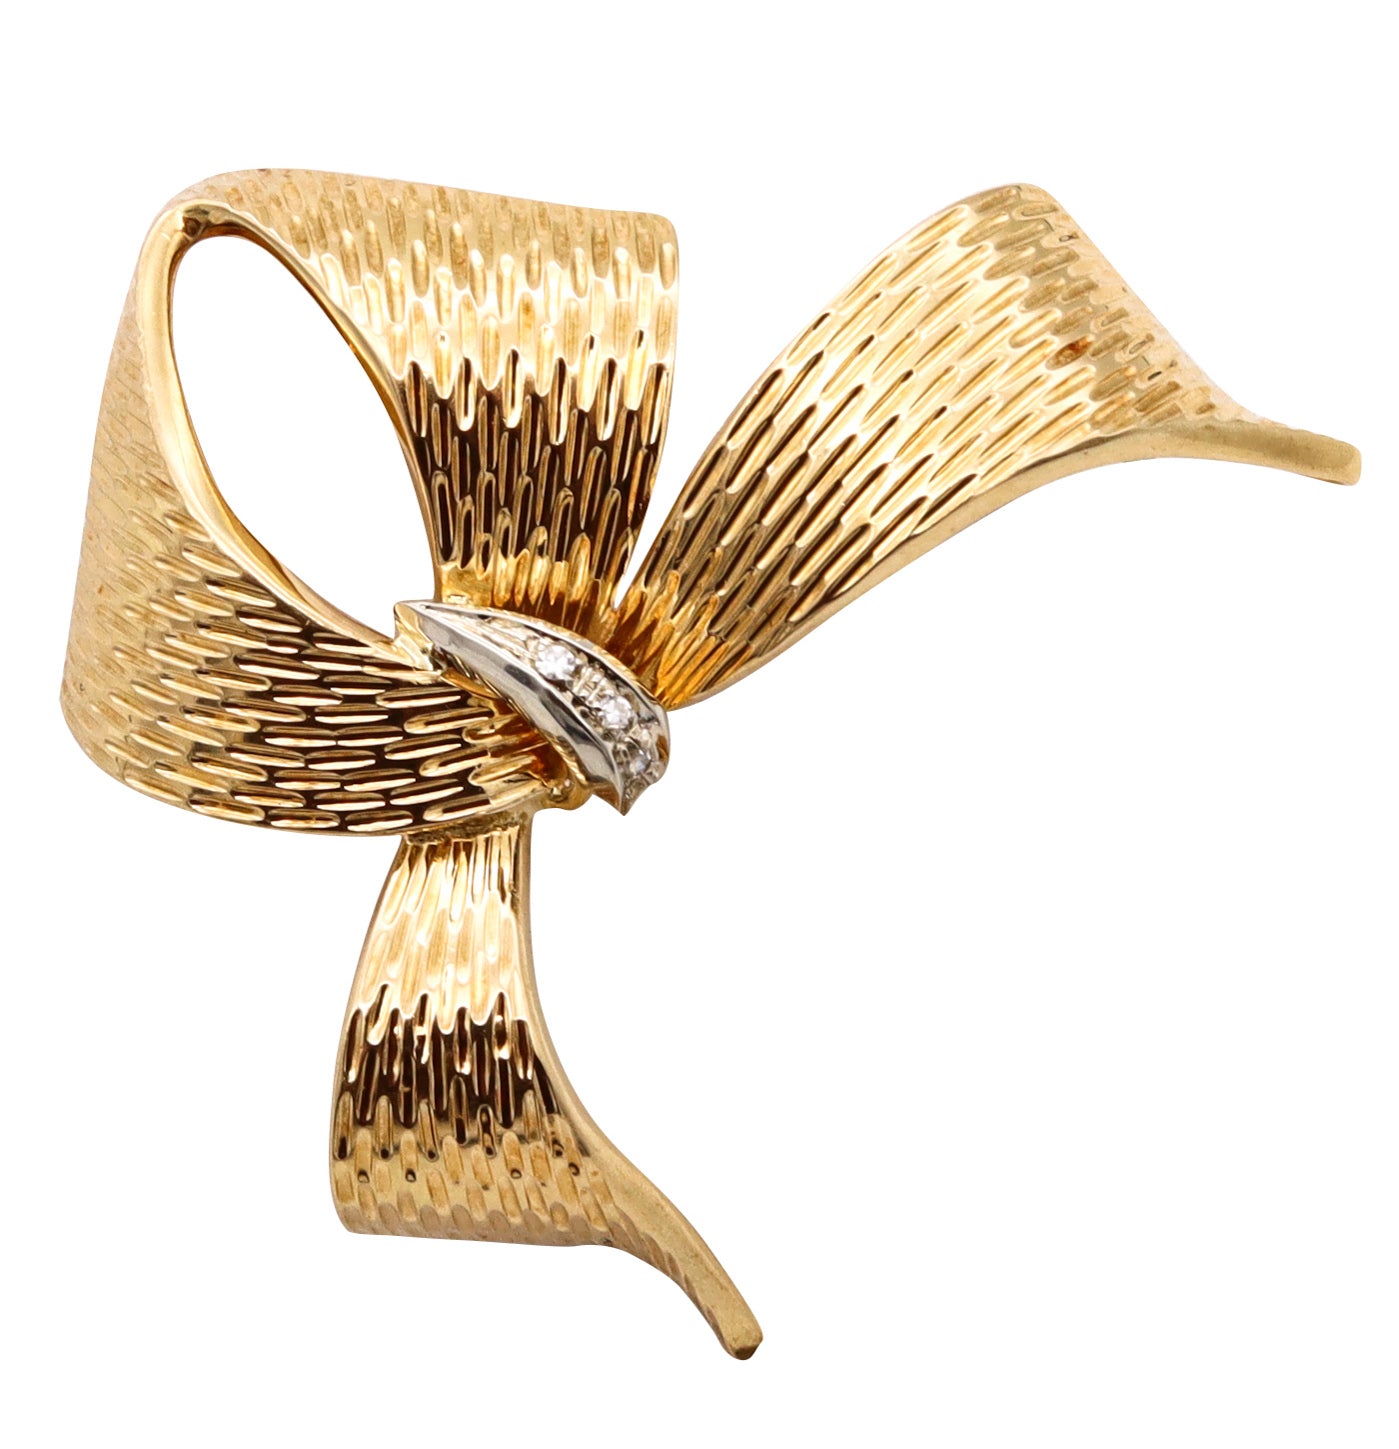 *Cartier 1970 Vintage bow brooch in solid 18 kt yellow gold with VS diamonds